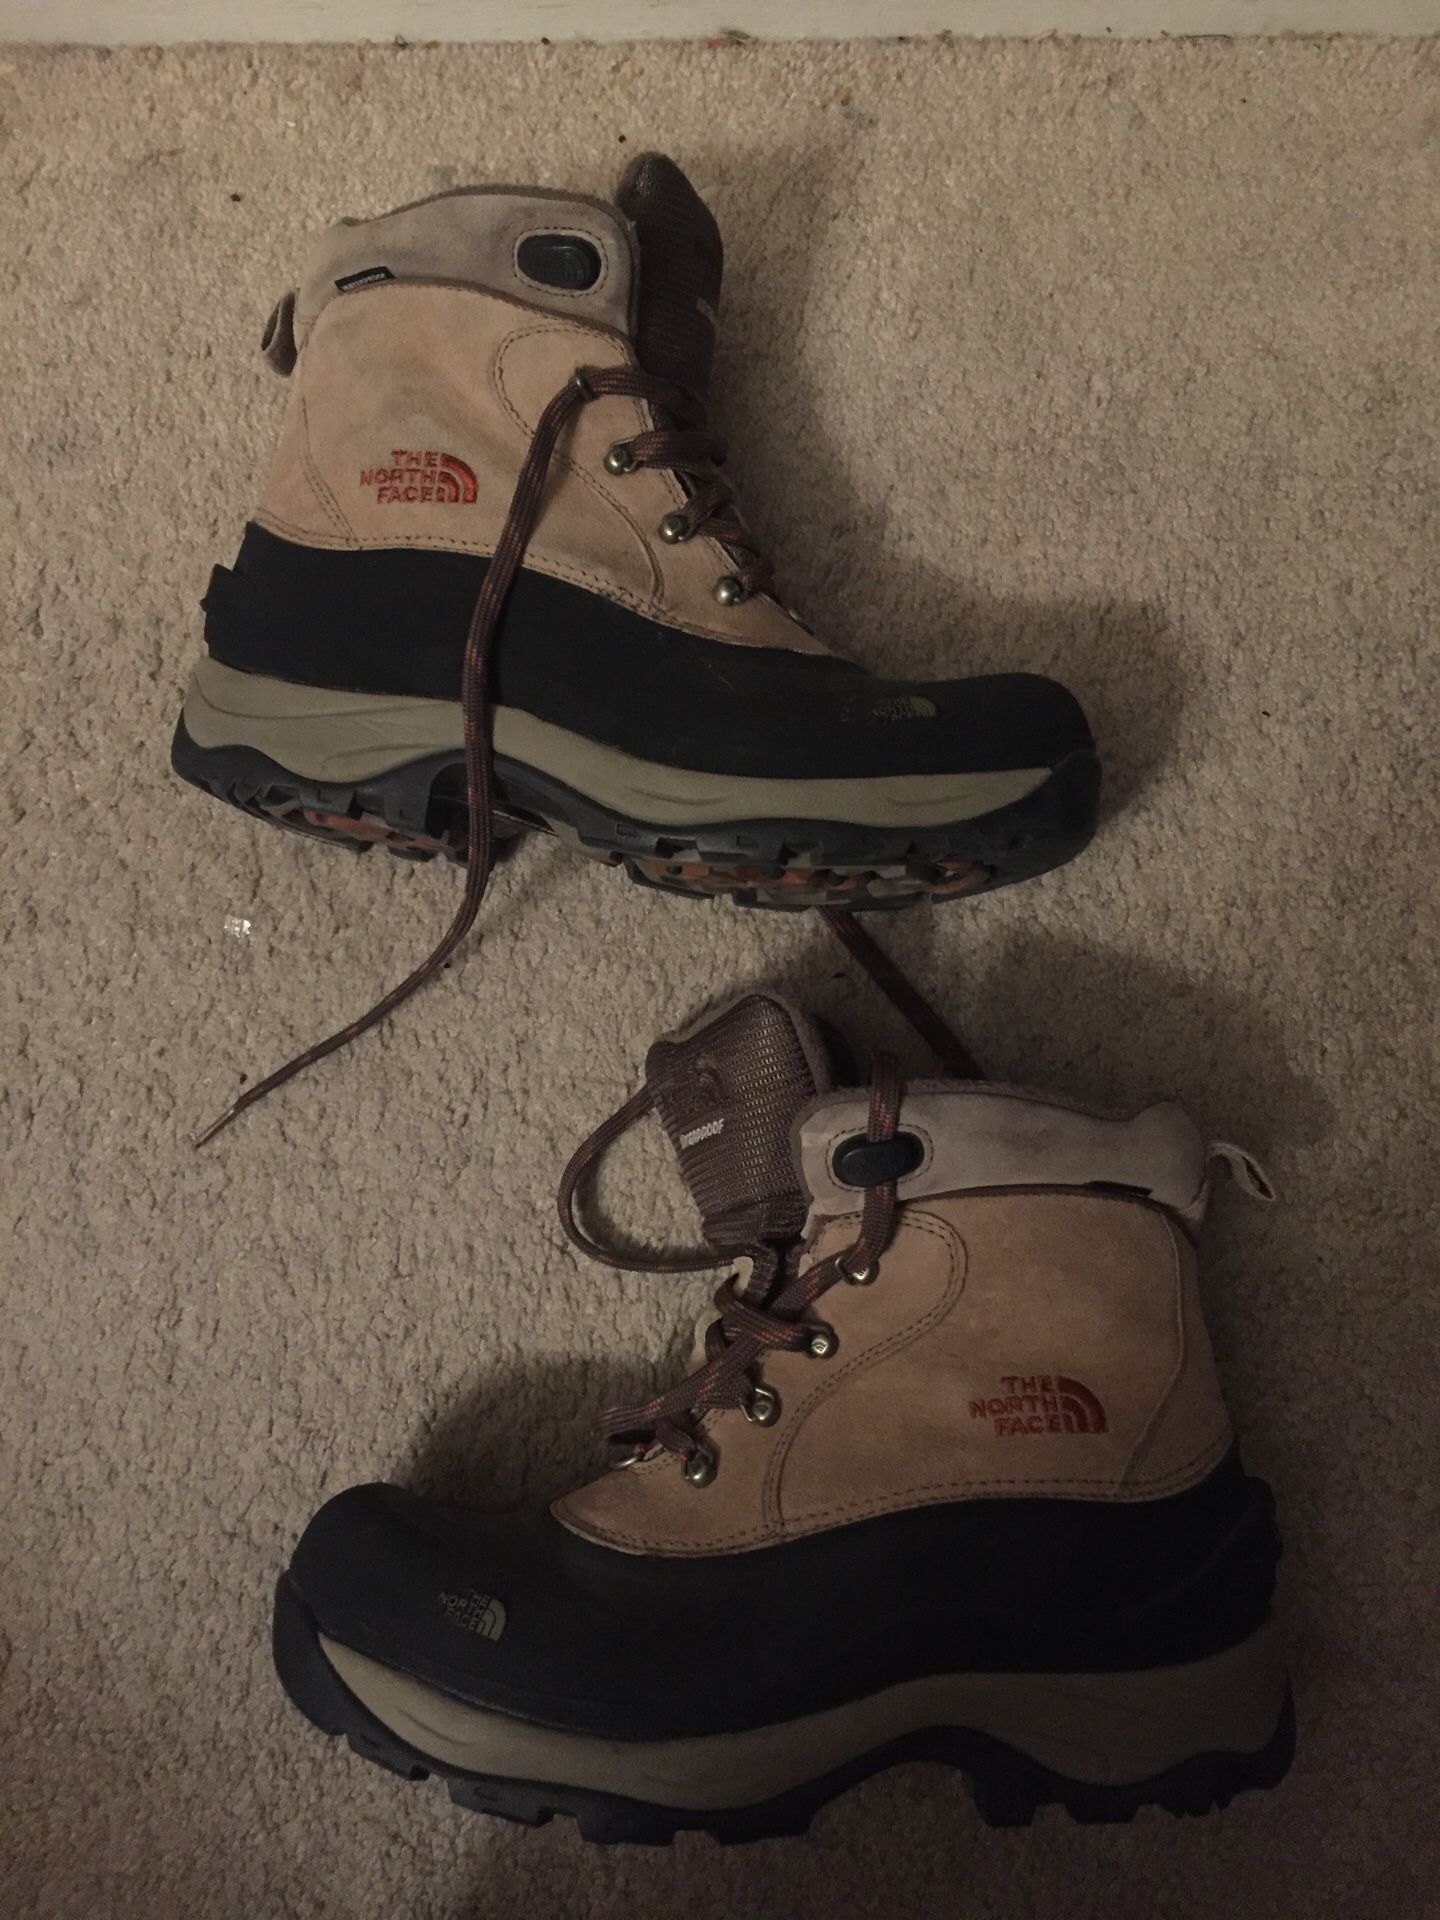 The North Face Water Proof Boot Size 11